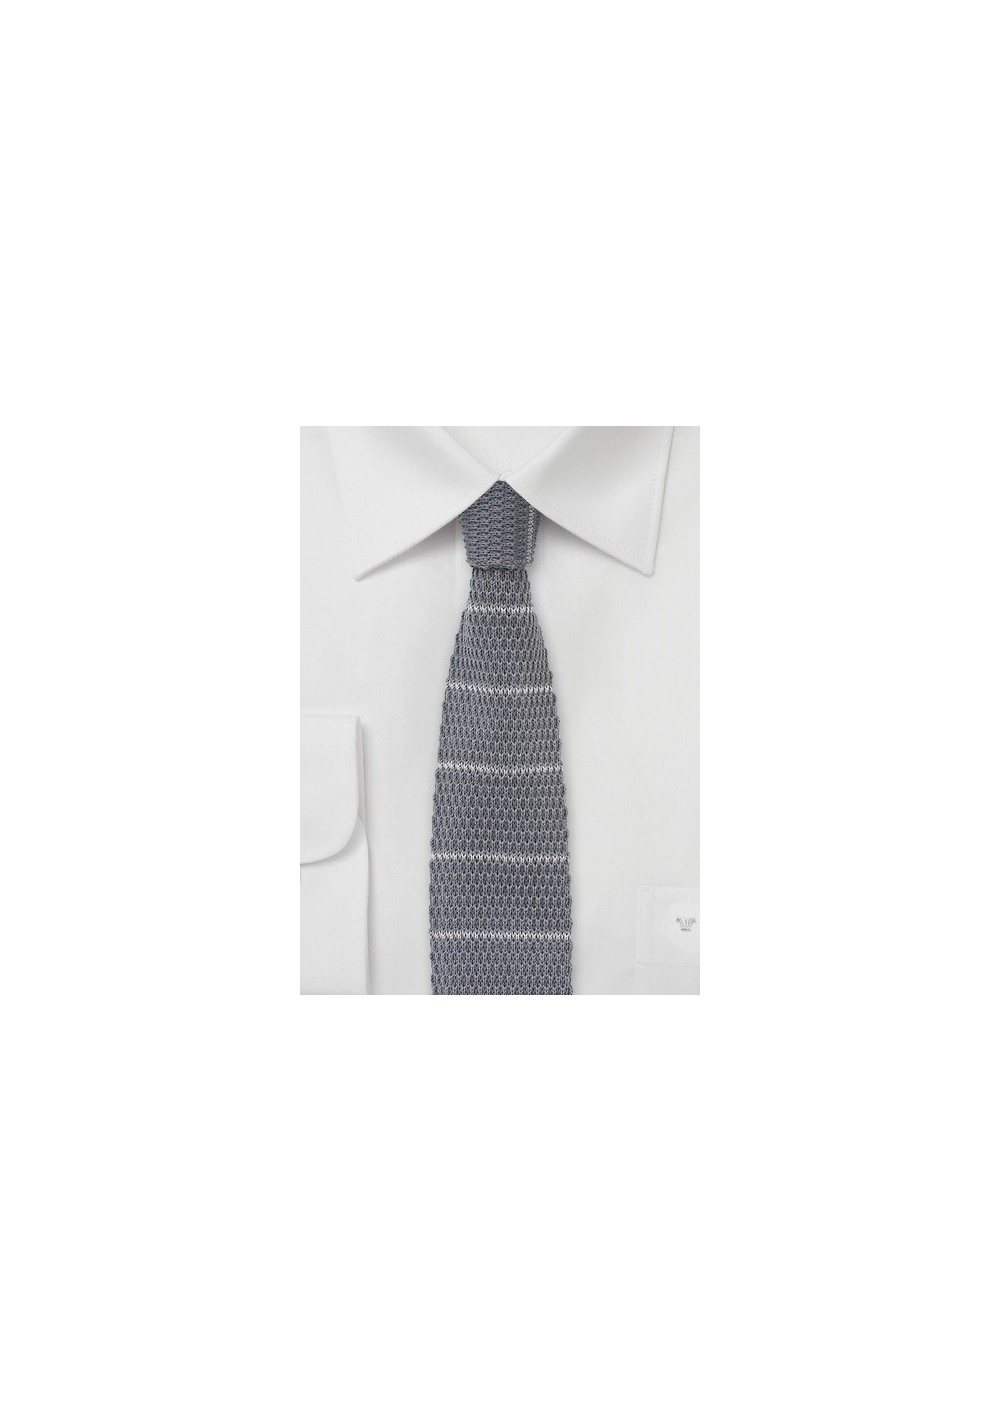 Cotton Knit Necktie in Gray and Silver